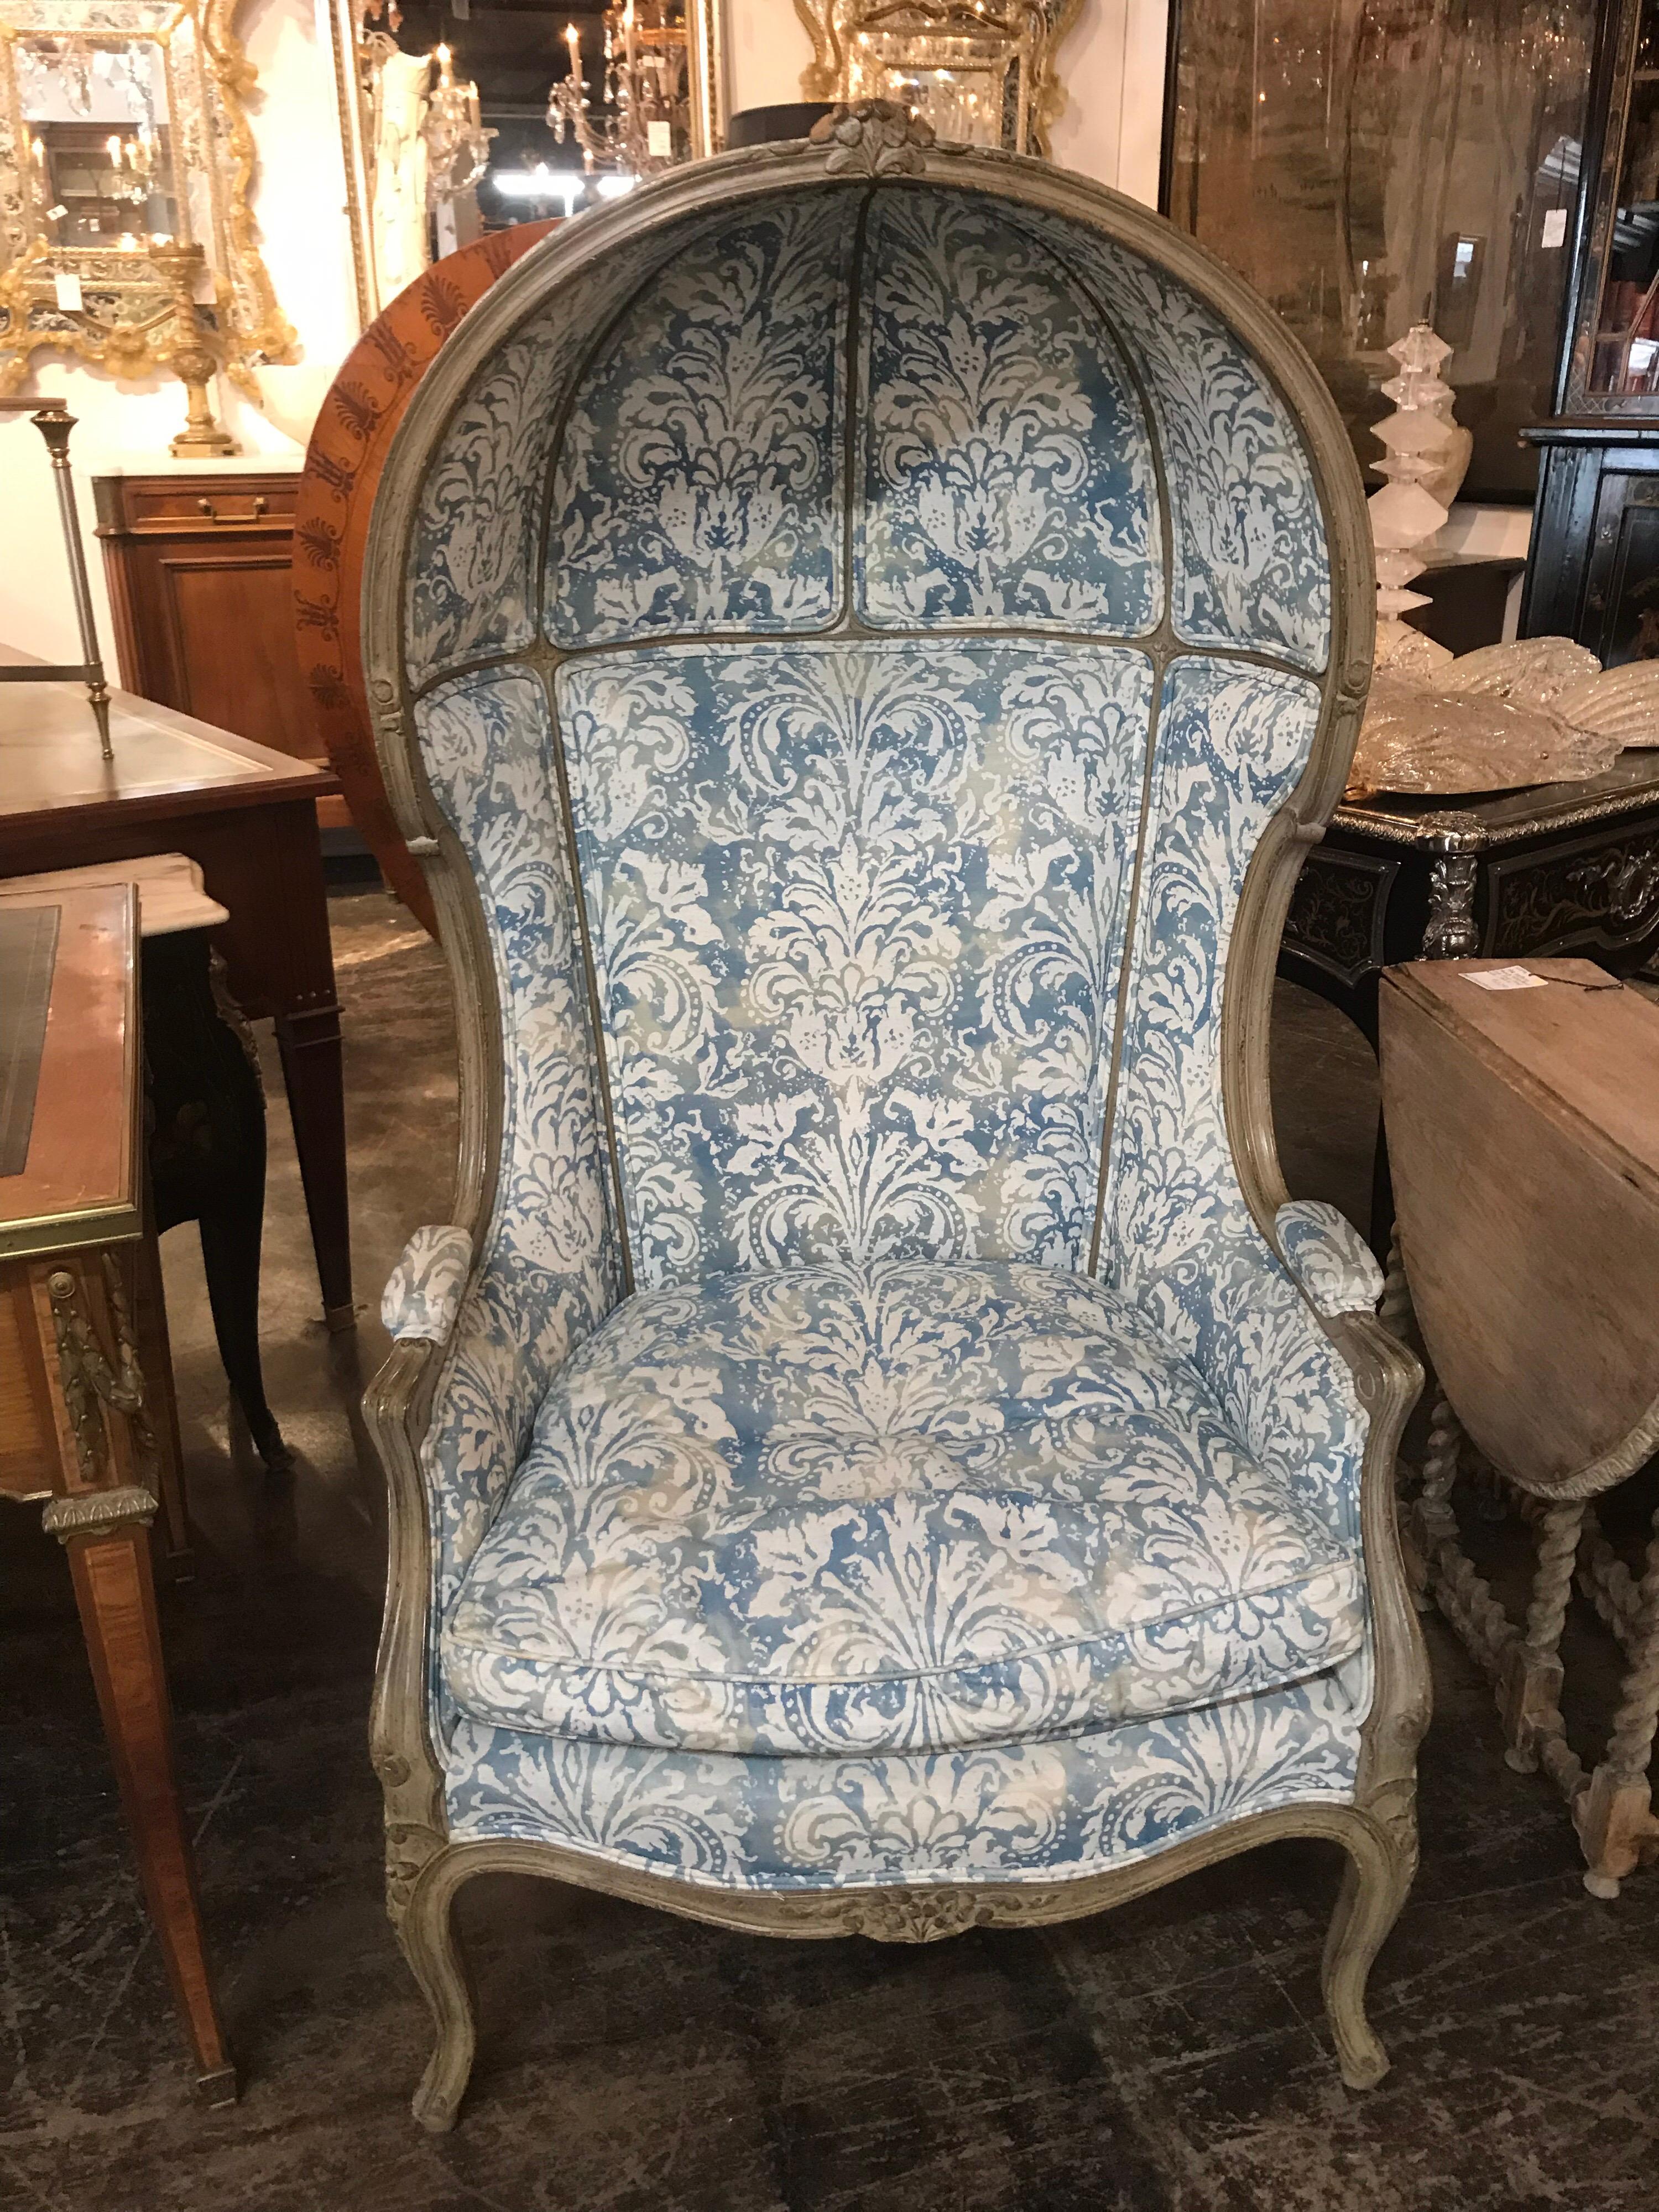 Superb 19th century French bonnet chair recently covered in Fortuny fabric. Having very nice carving and original paint finish, this chair is sure to make a statement!